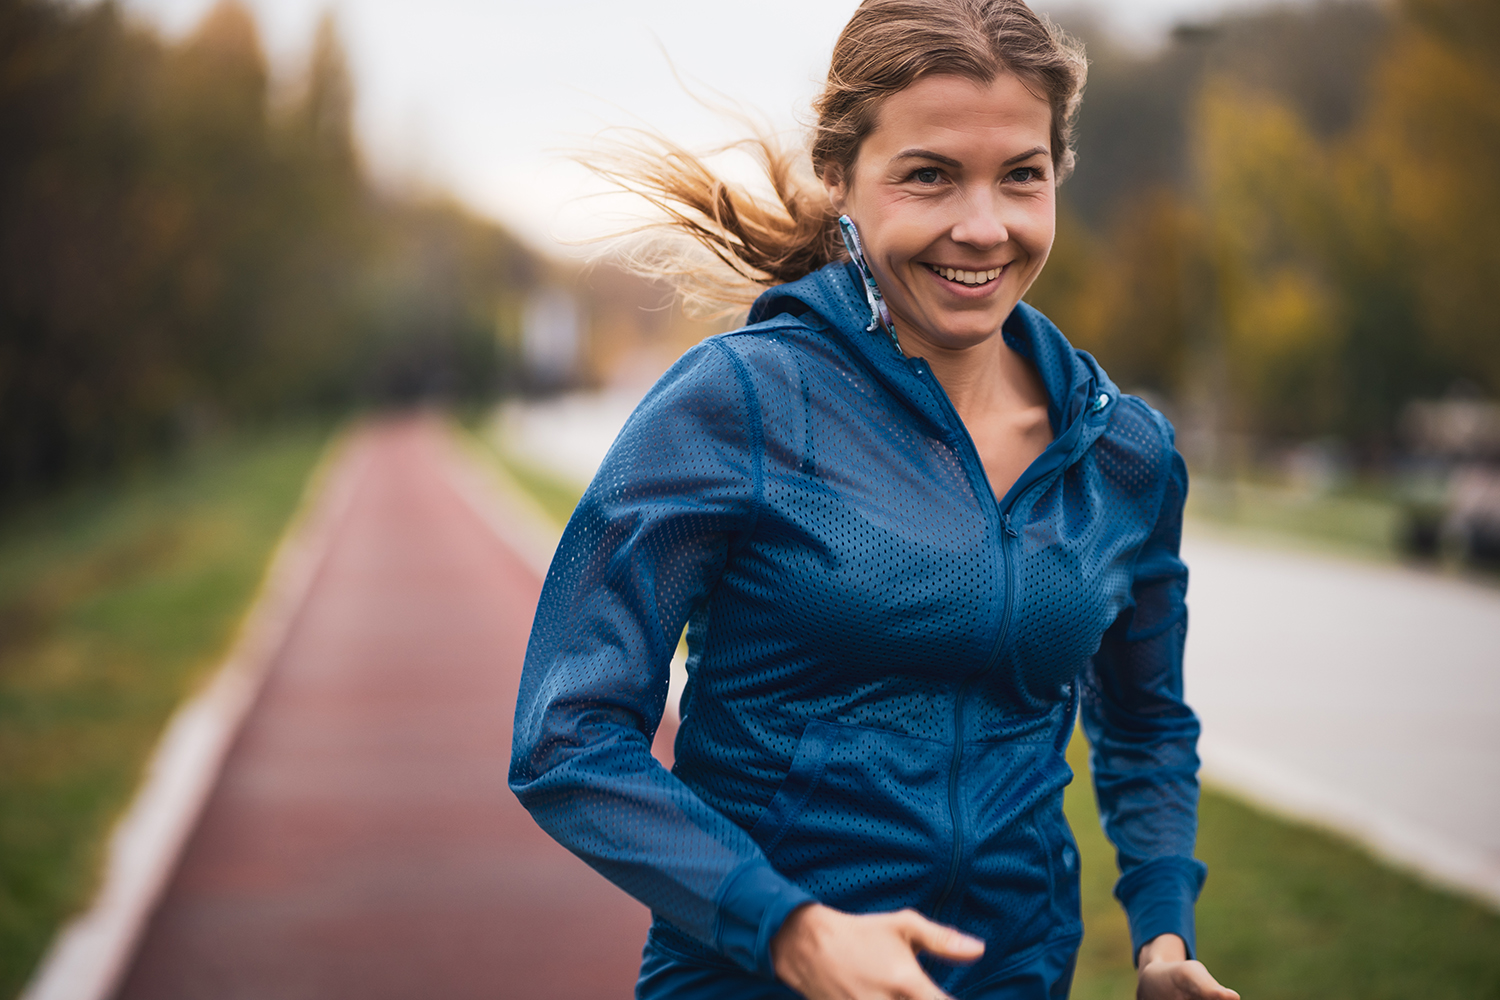 Running for Beginners: 5 Ways to Improve Your Run